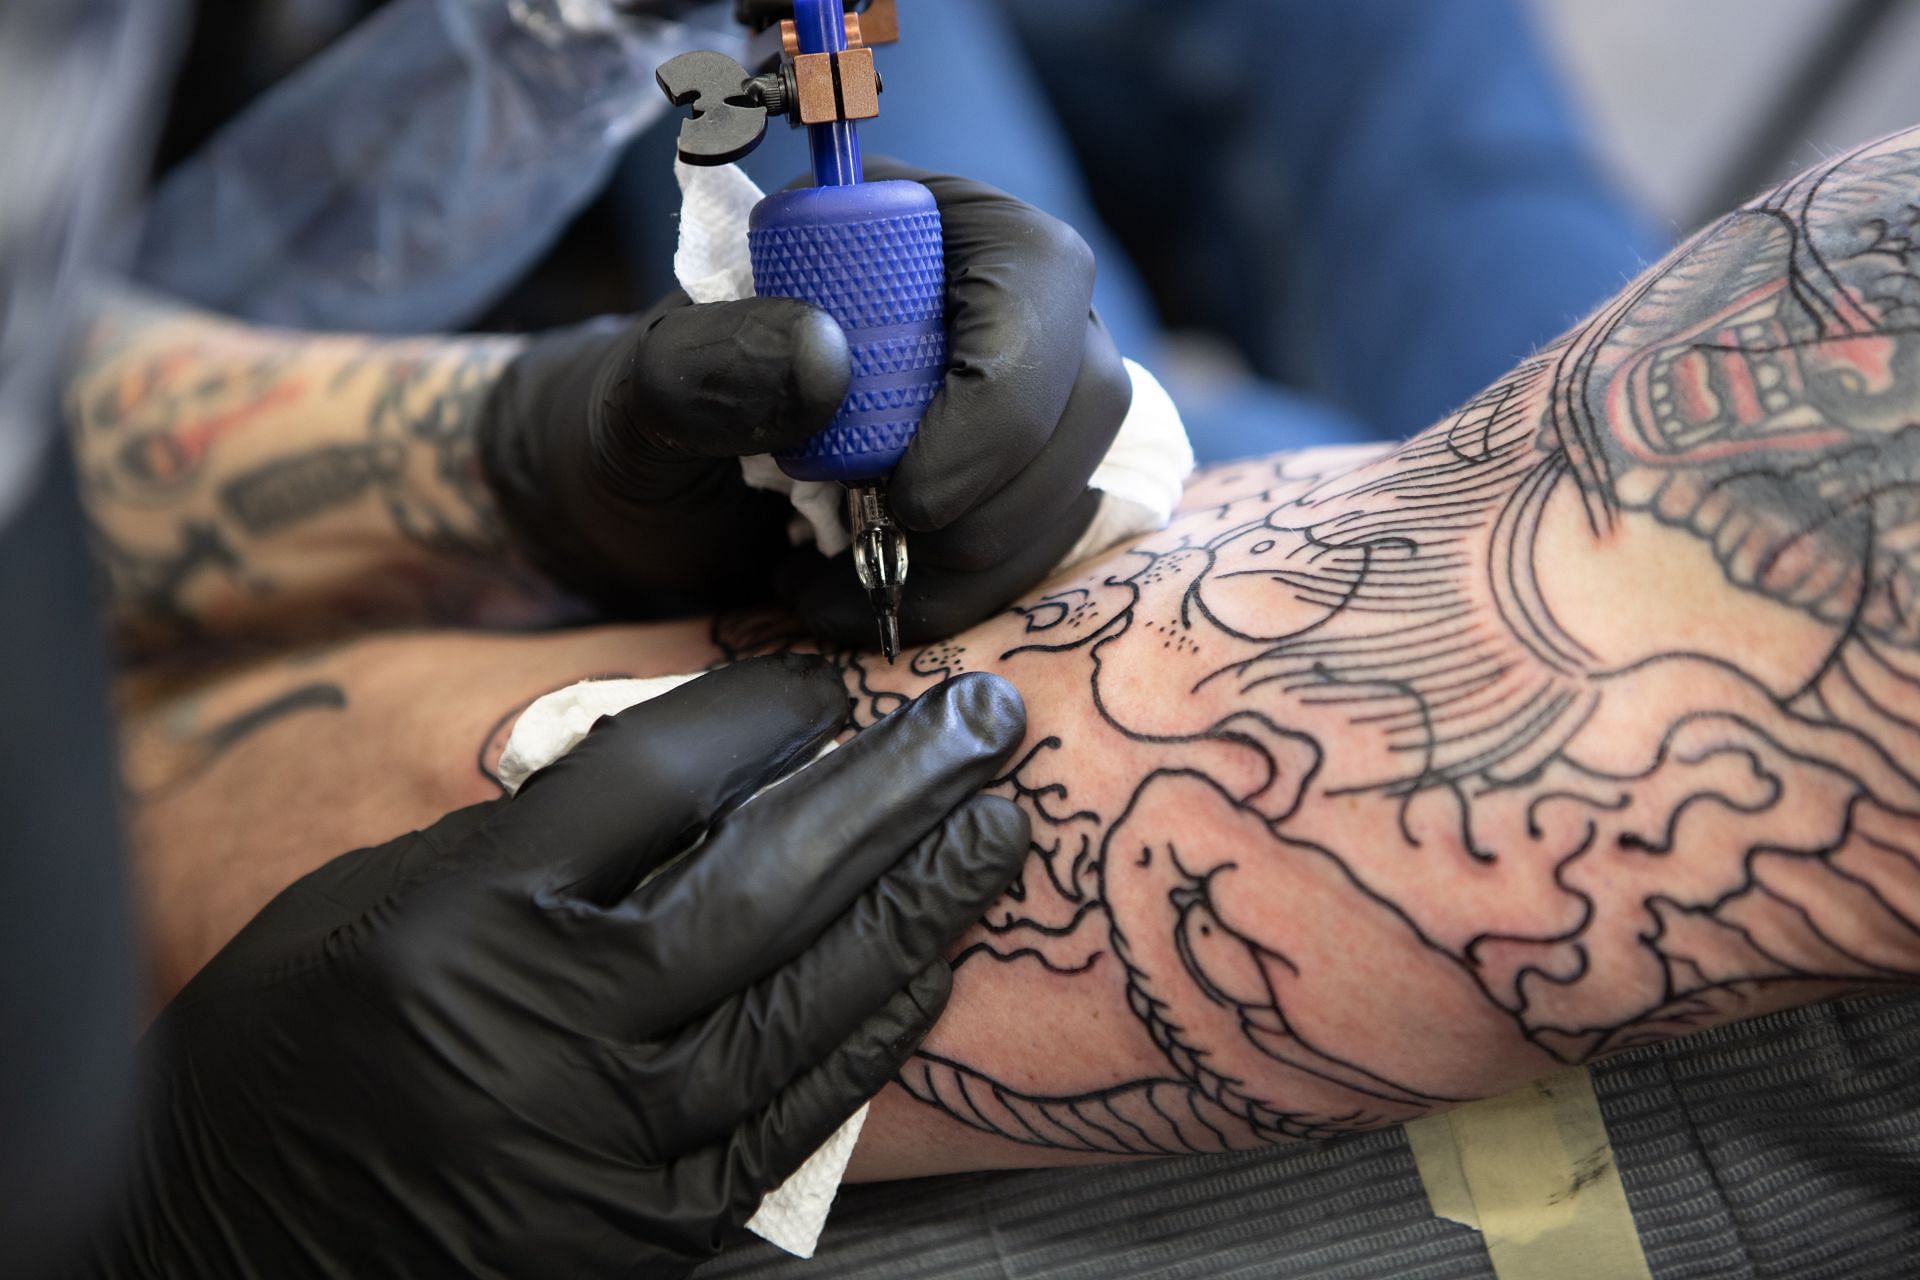 The tattoo healing process can be broken down into the aforementioned stages. (Image via unsplash/Benjamin Lehman)